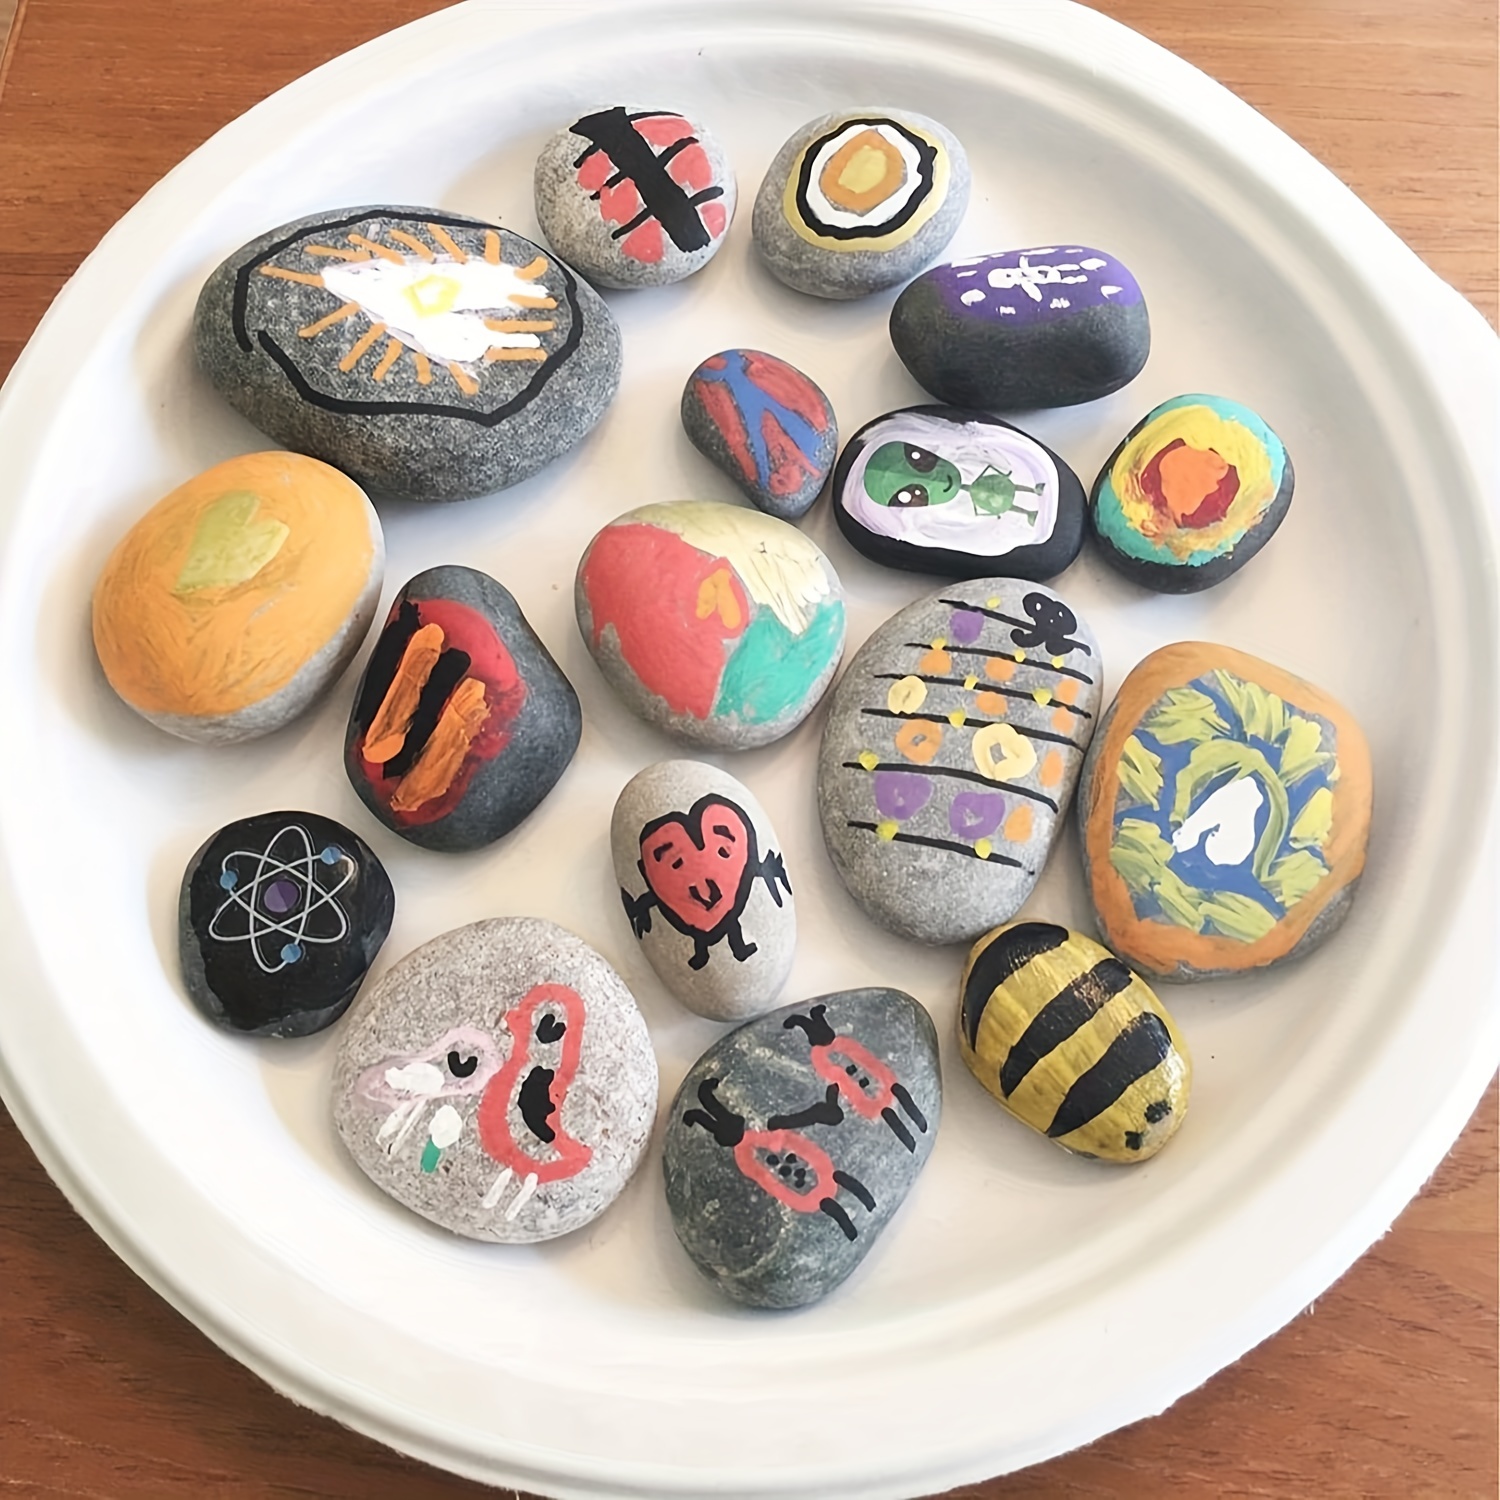 15 Pcs Rocks for Painting, River Rocks to Paint, 2-3 Flat